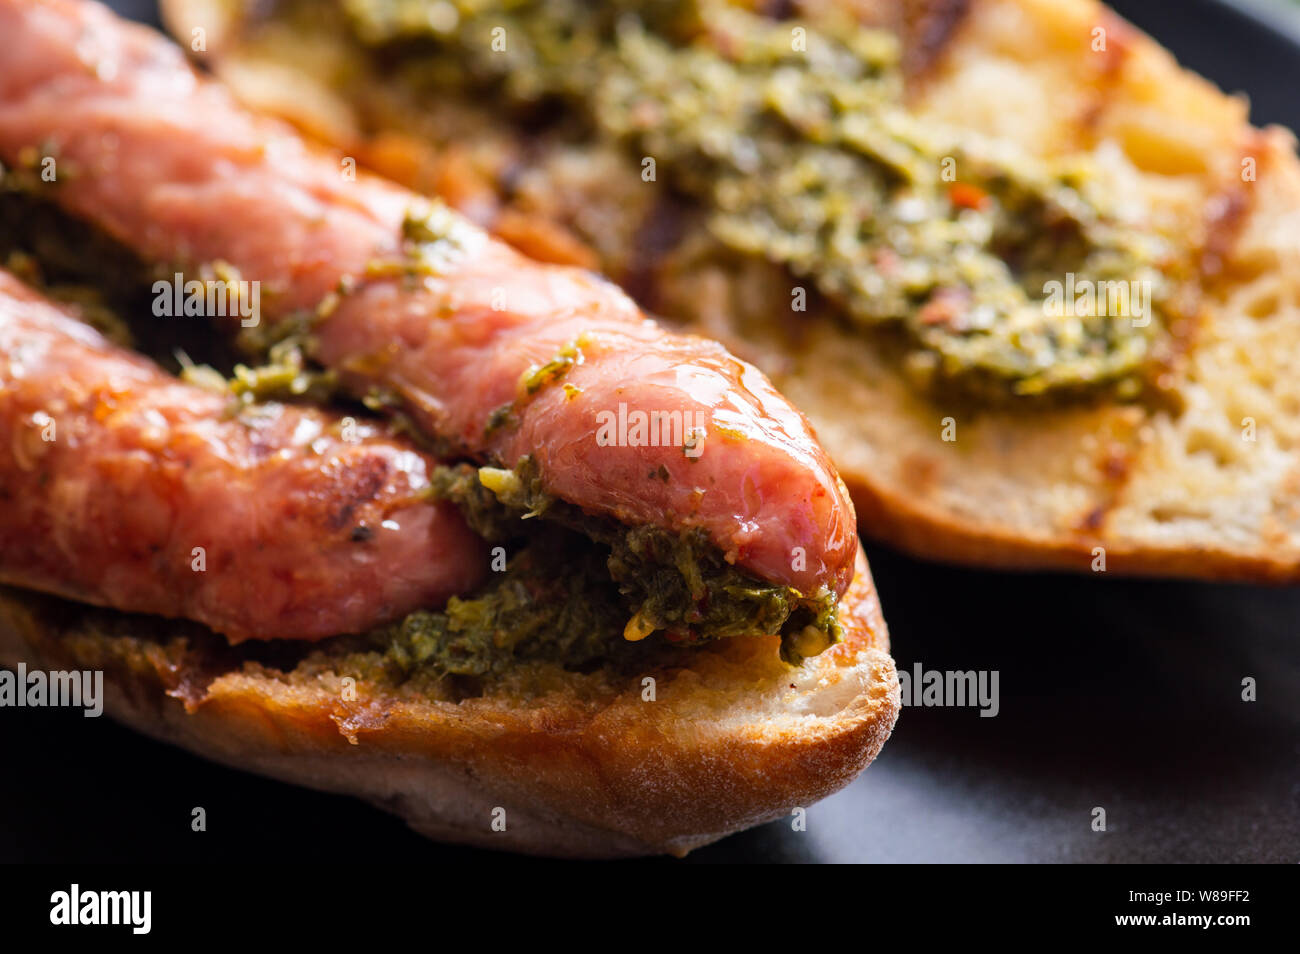 Choripan, south American style chorizo sandwich made with Argentine chorizo sausage with chimichurri, a parsley and olive oil based condiment Stock Photo